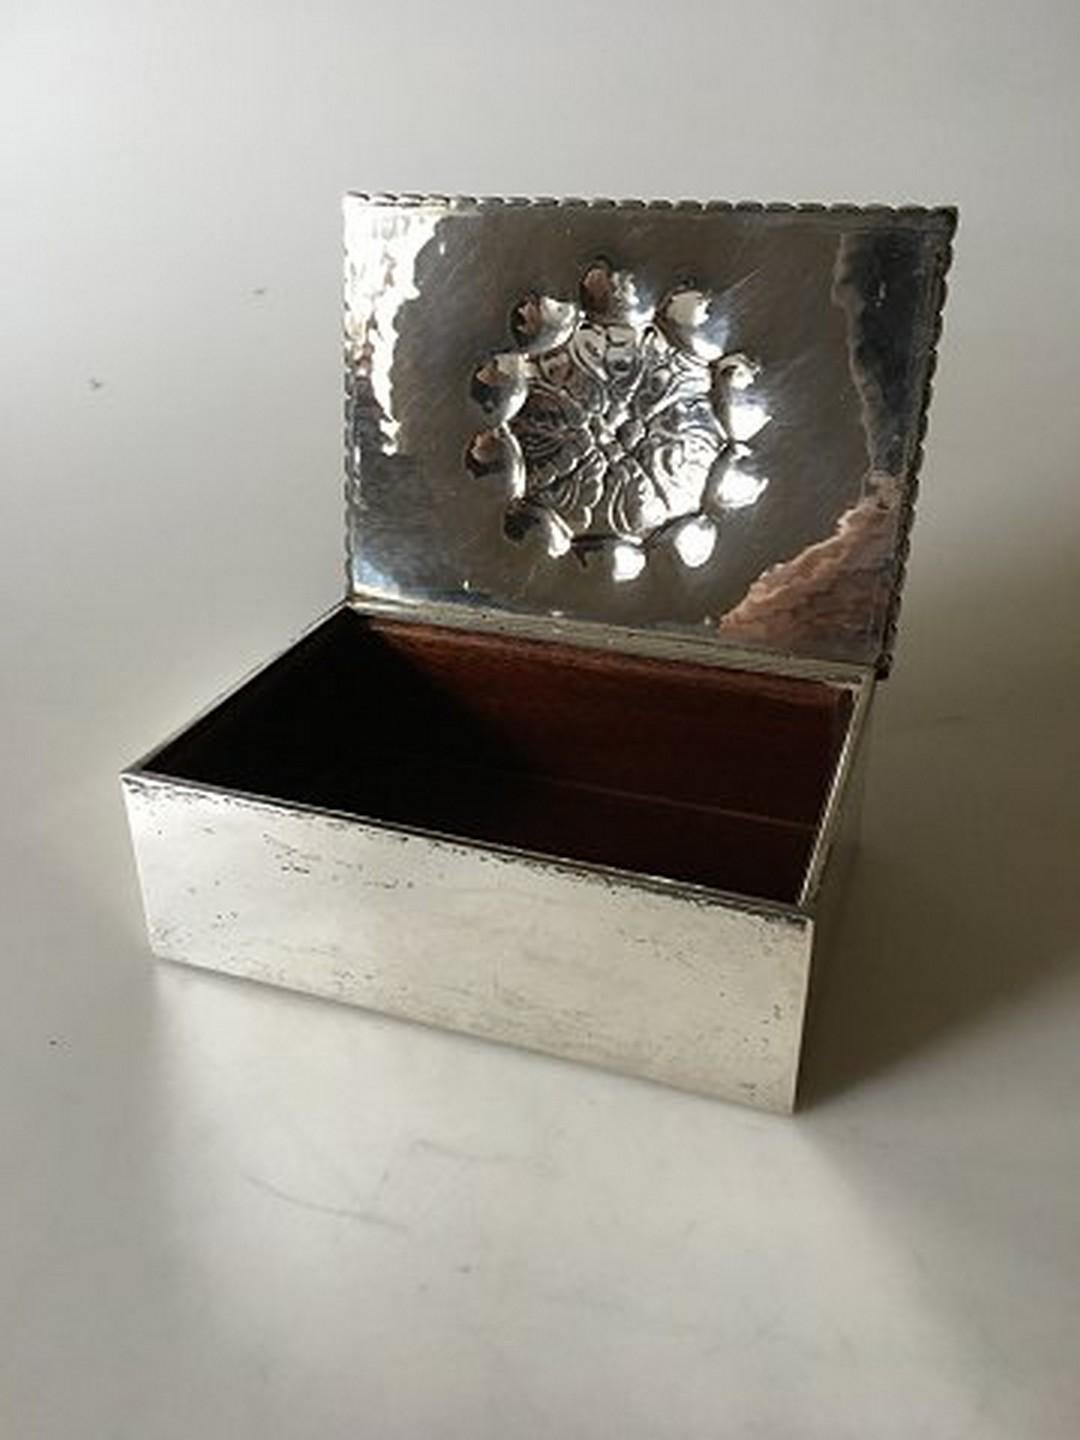 Georg Jensen box in 830 silver from 1919 no 89. Measures 13.5 cm x 10 cm (5 5/16